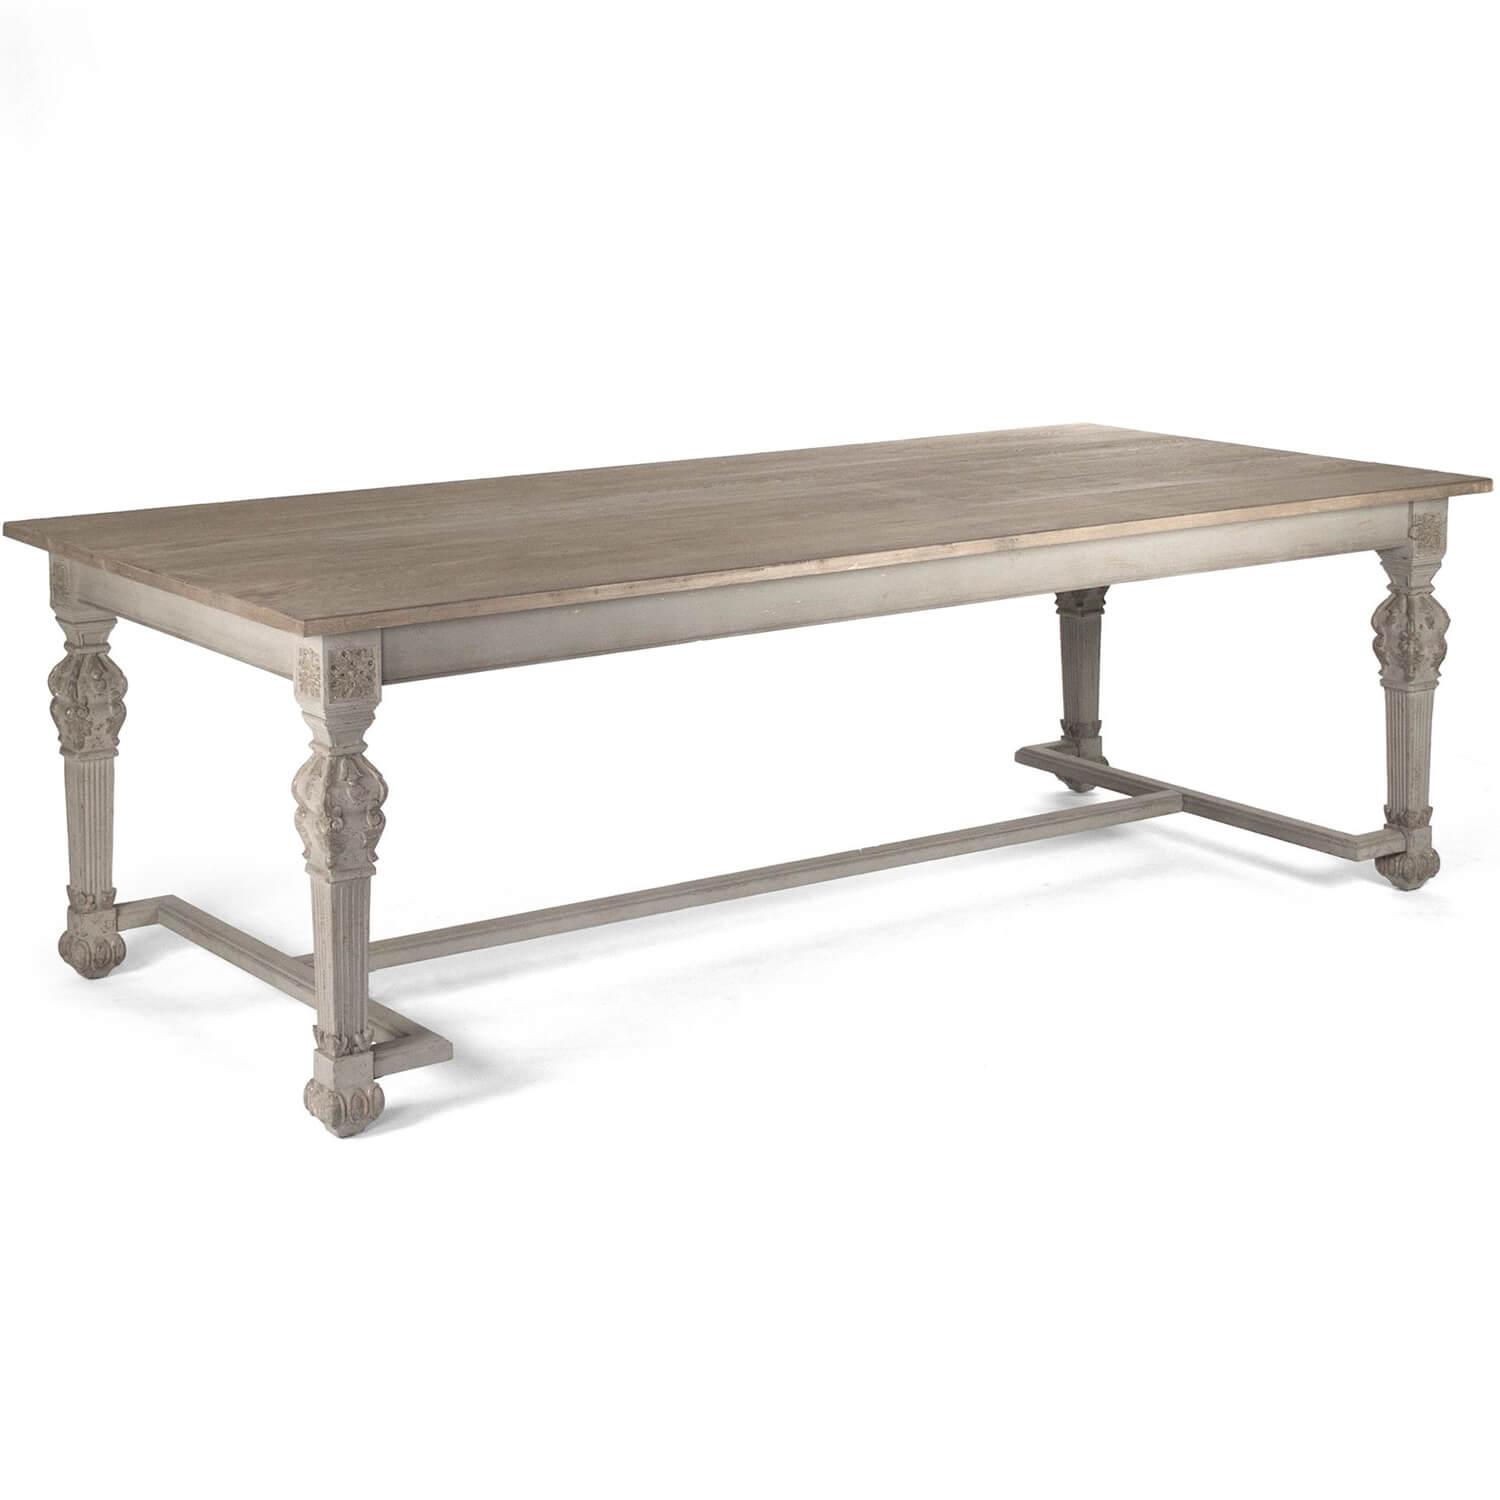 French Wood Top Dining Table - Belle Escape